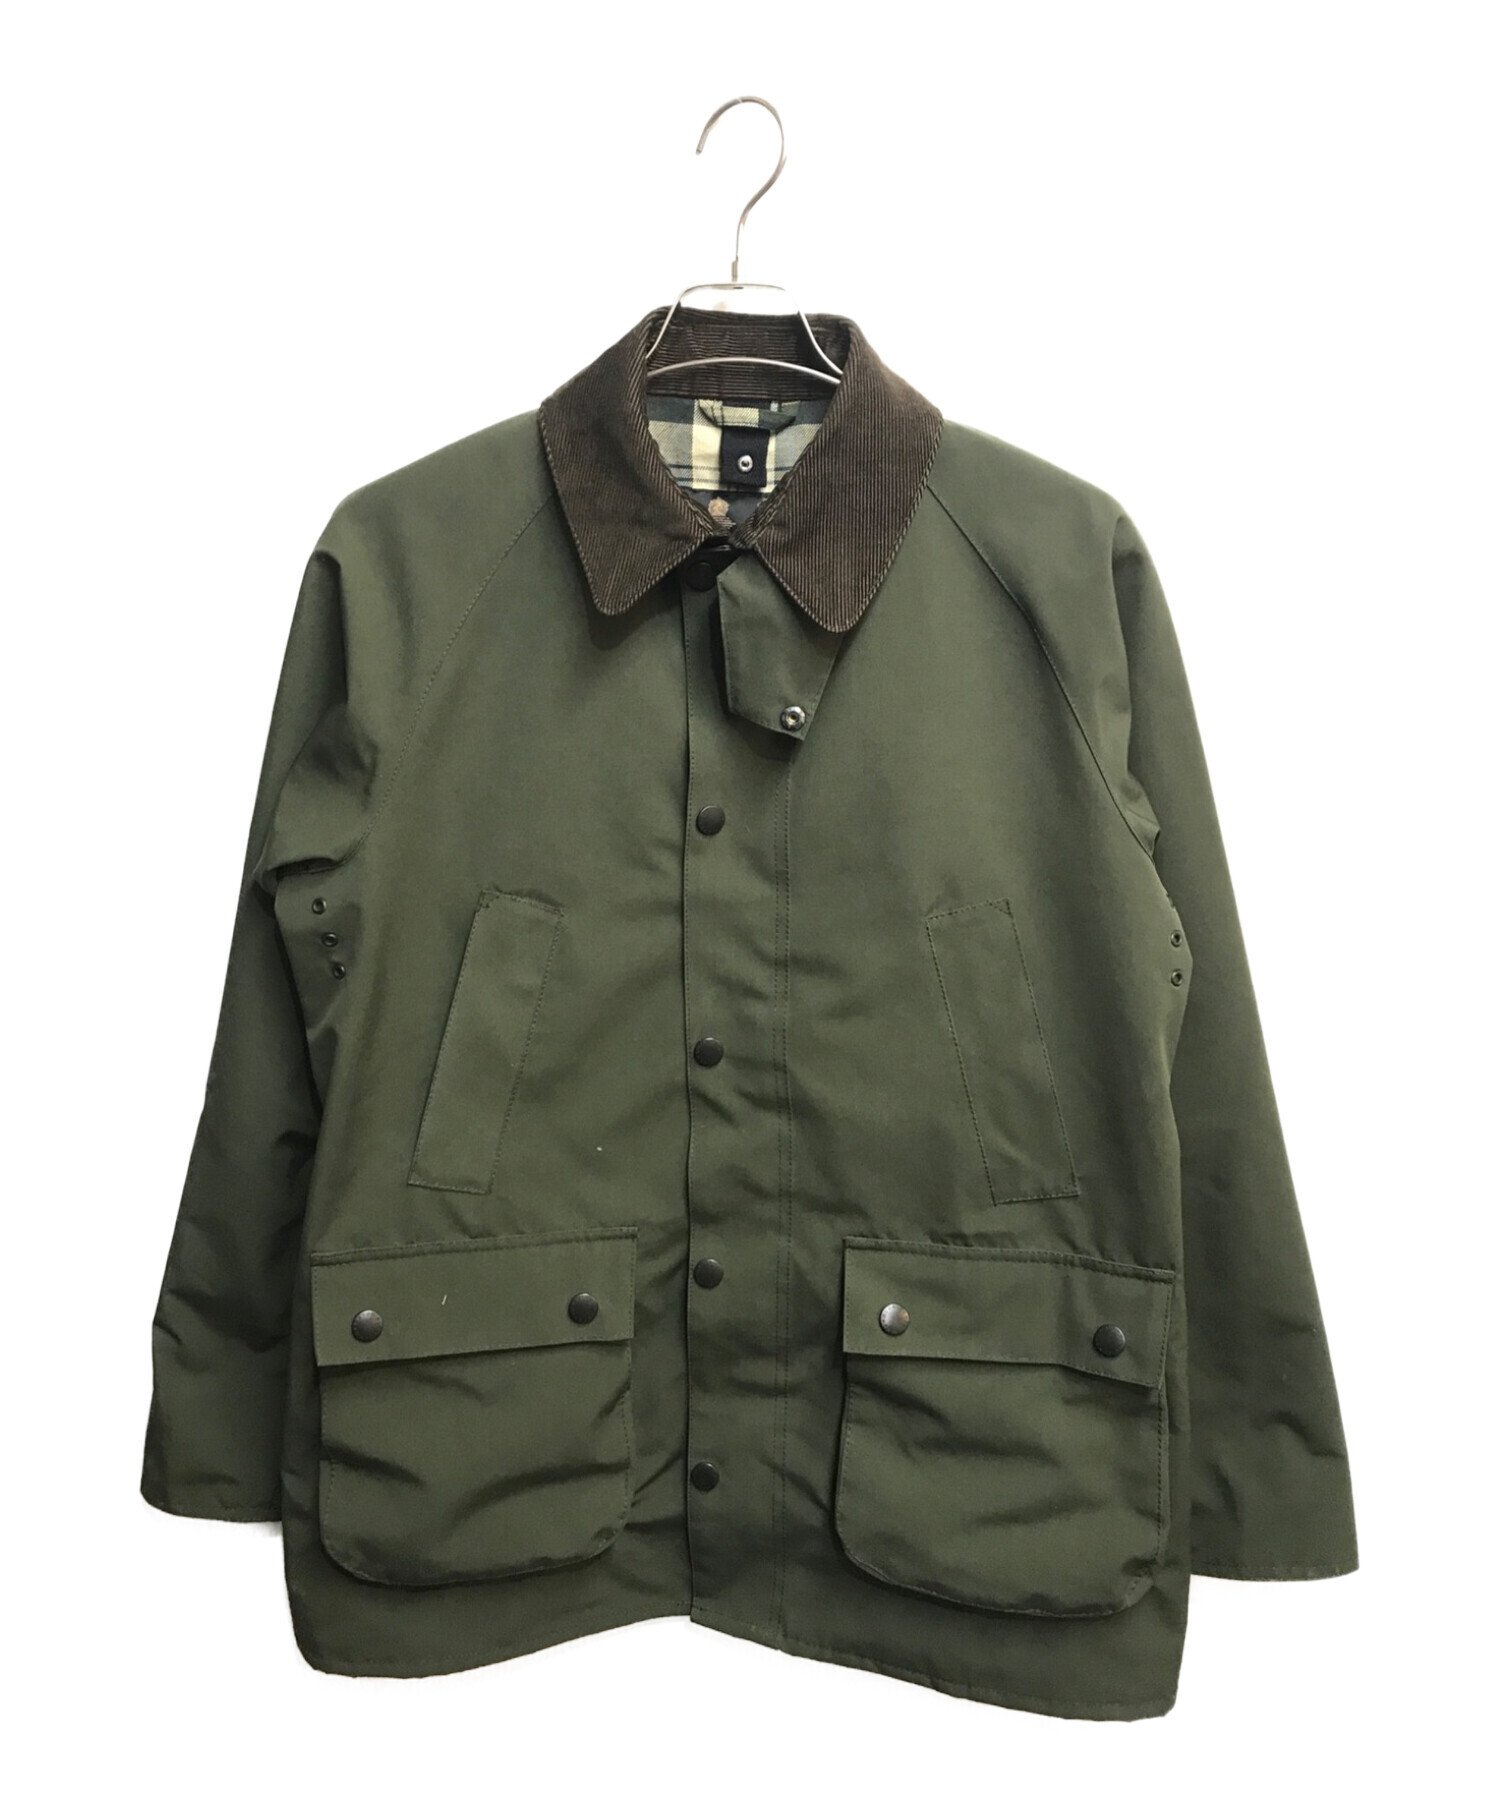 Barbour バブアー 40 カーキ BEDALE SL 2LAYER-hybridautomotive.com